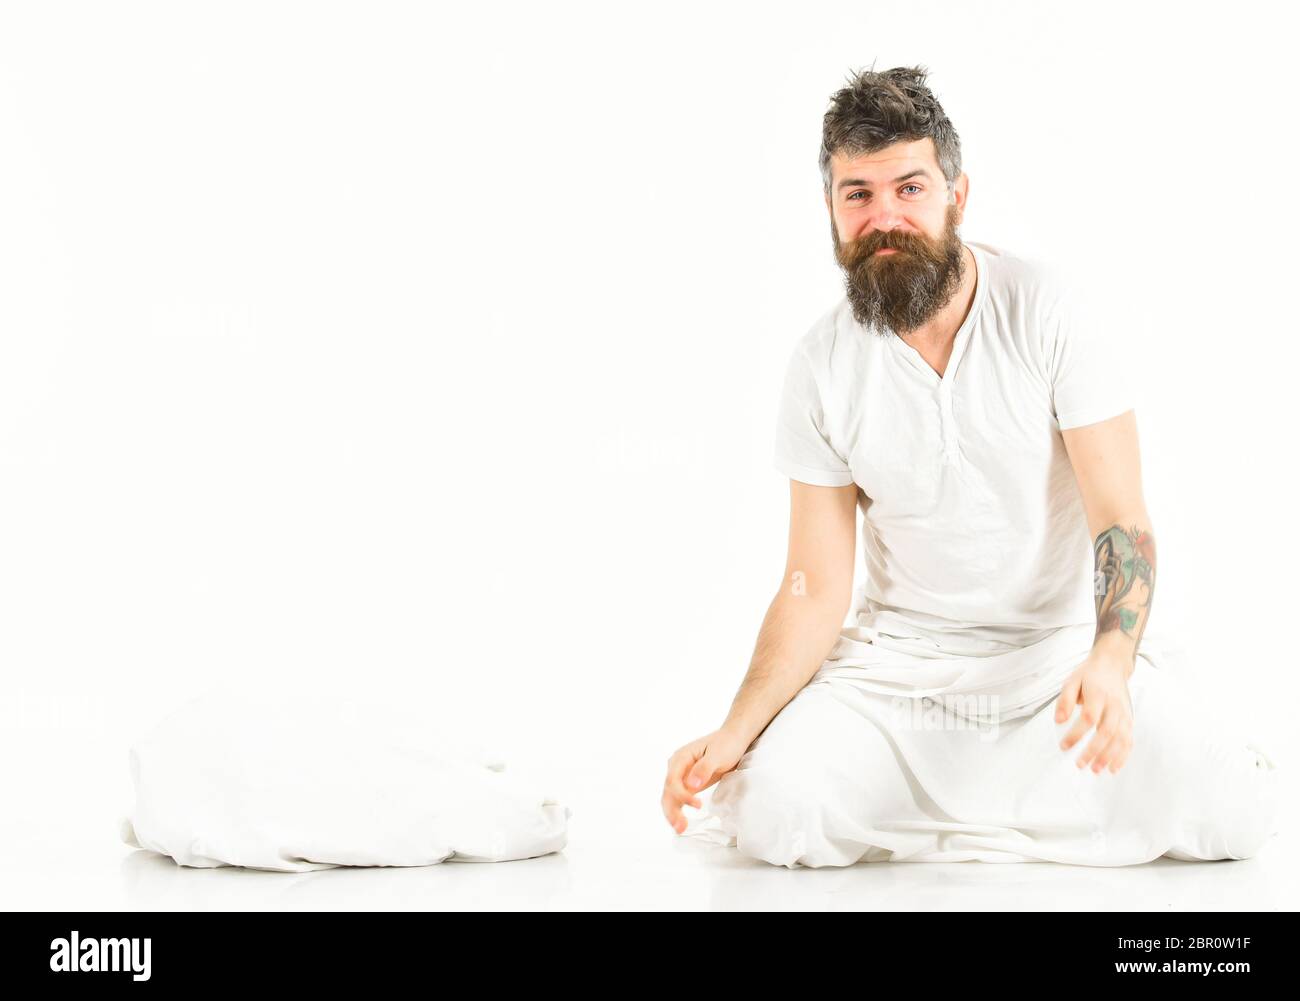 Hipster with beard sits near pillow, sleepy smiling macho. Man after good rest in morning, white background. Energetic man concept. Man with happy face in white pajama waking up. Stock Photo